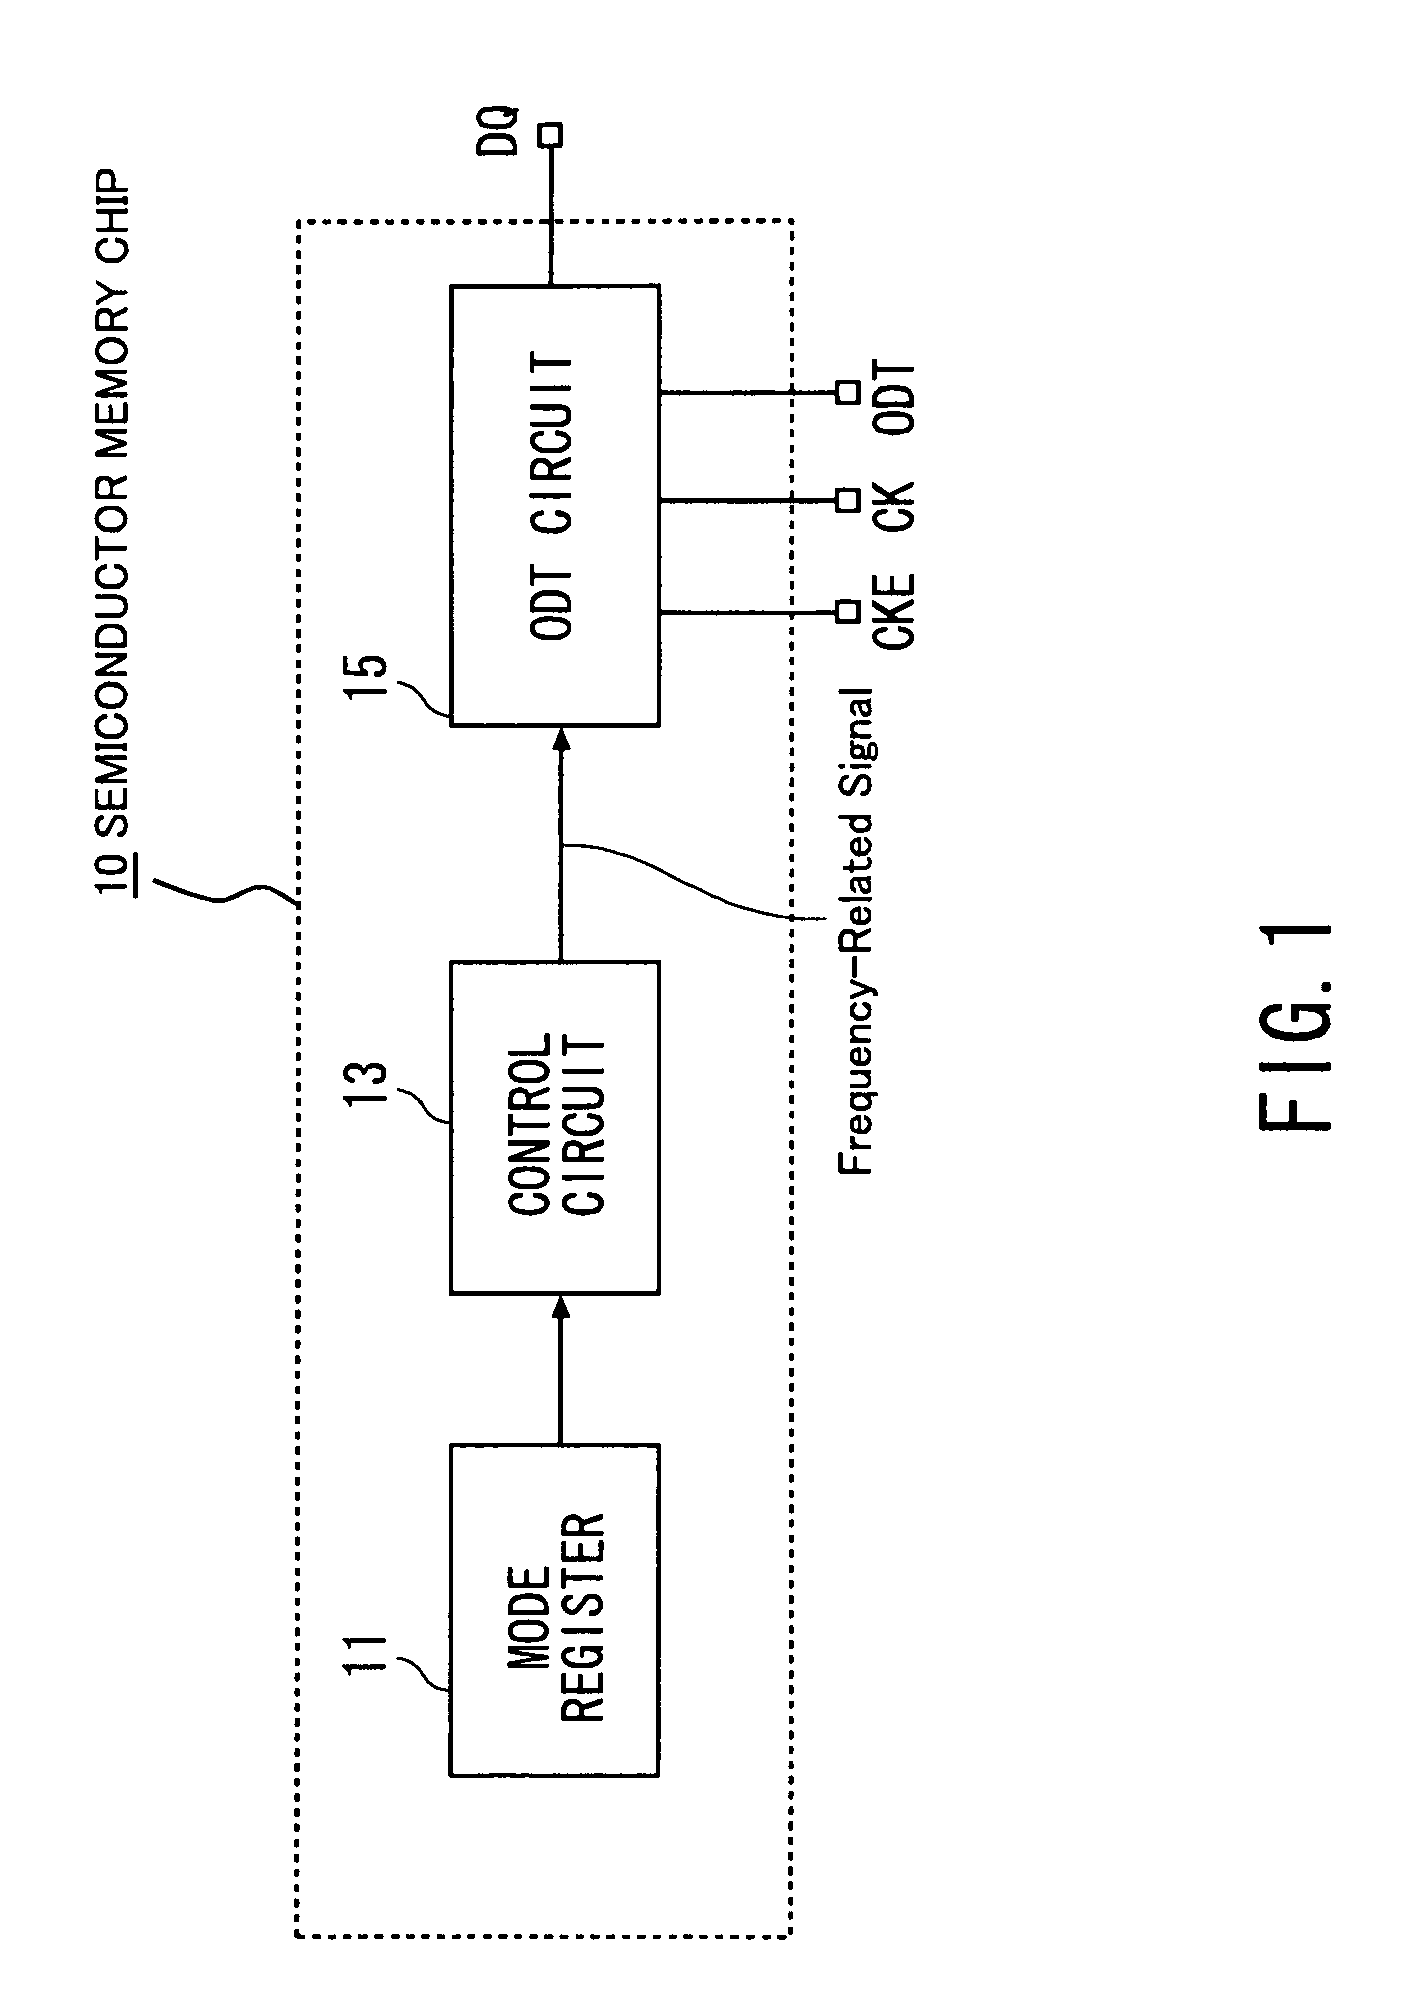 Semiconductor memory chip with on-die termination function